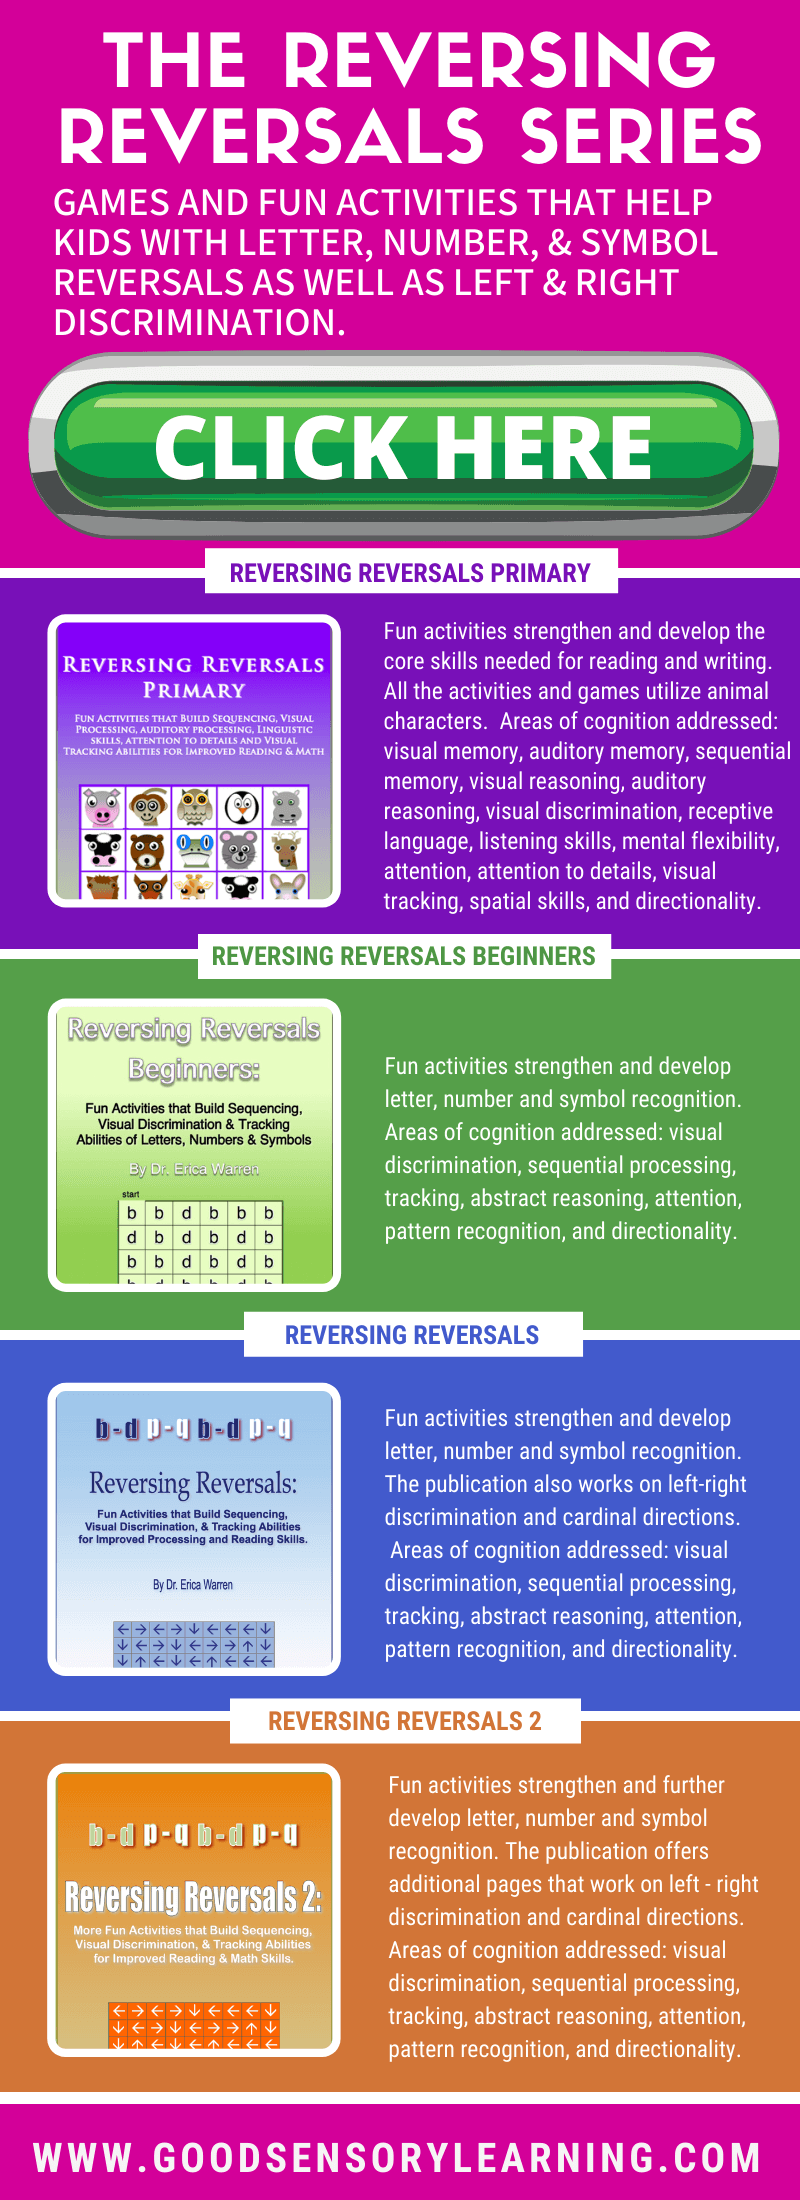 colorful infographic of the reversing reversals series